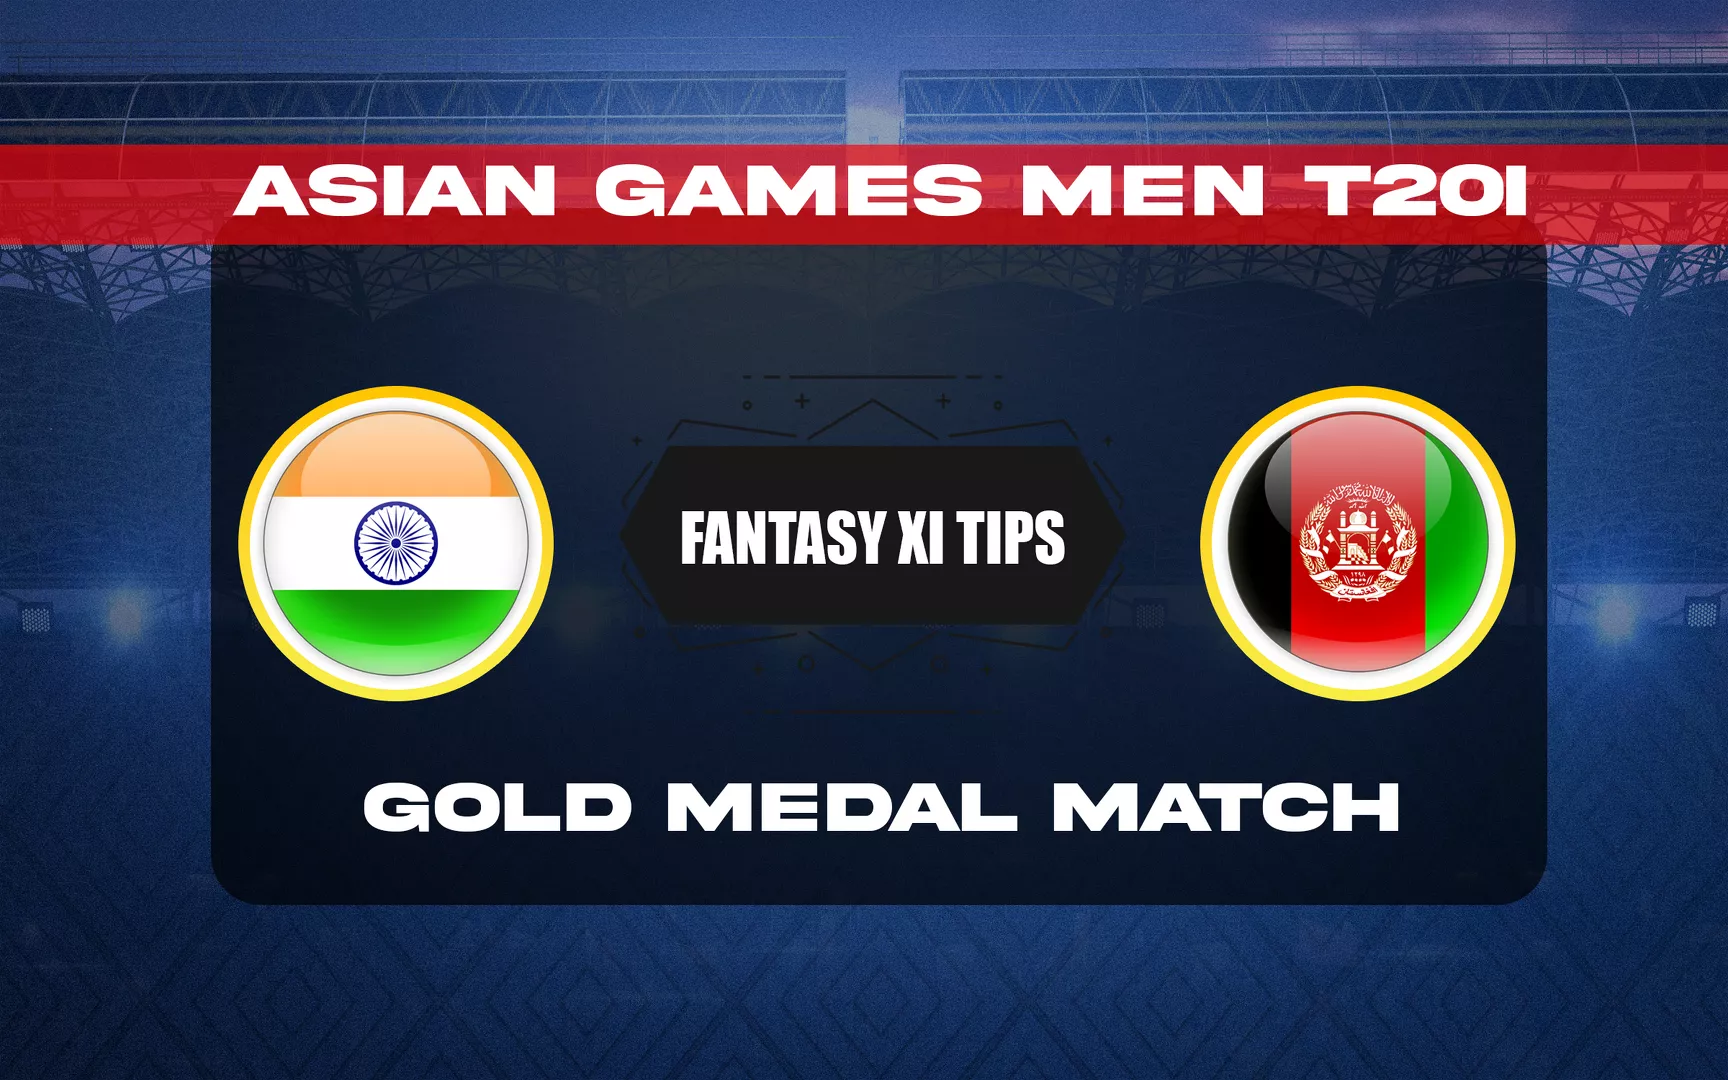 IND vs AFG Dream11 Prediction, Dream11 Playing XI, Today Gold Medal Match, Asian Games Men T20I